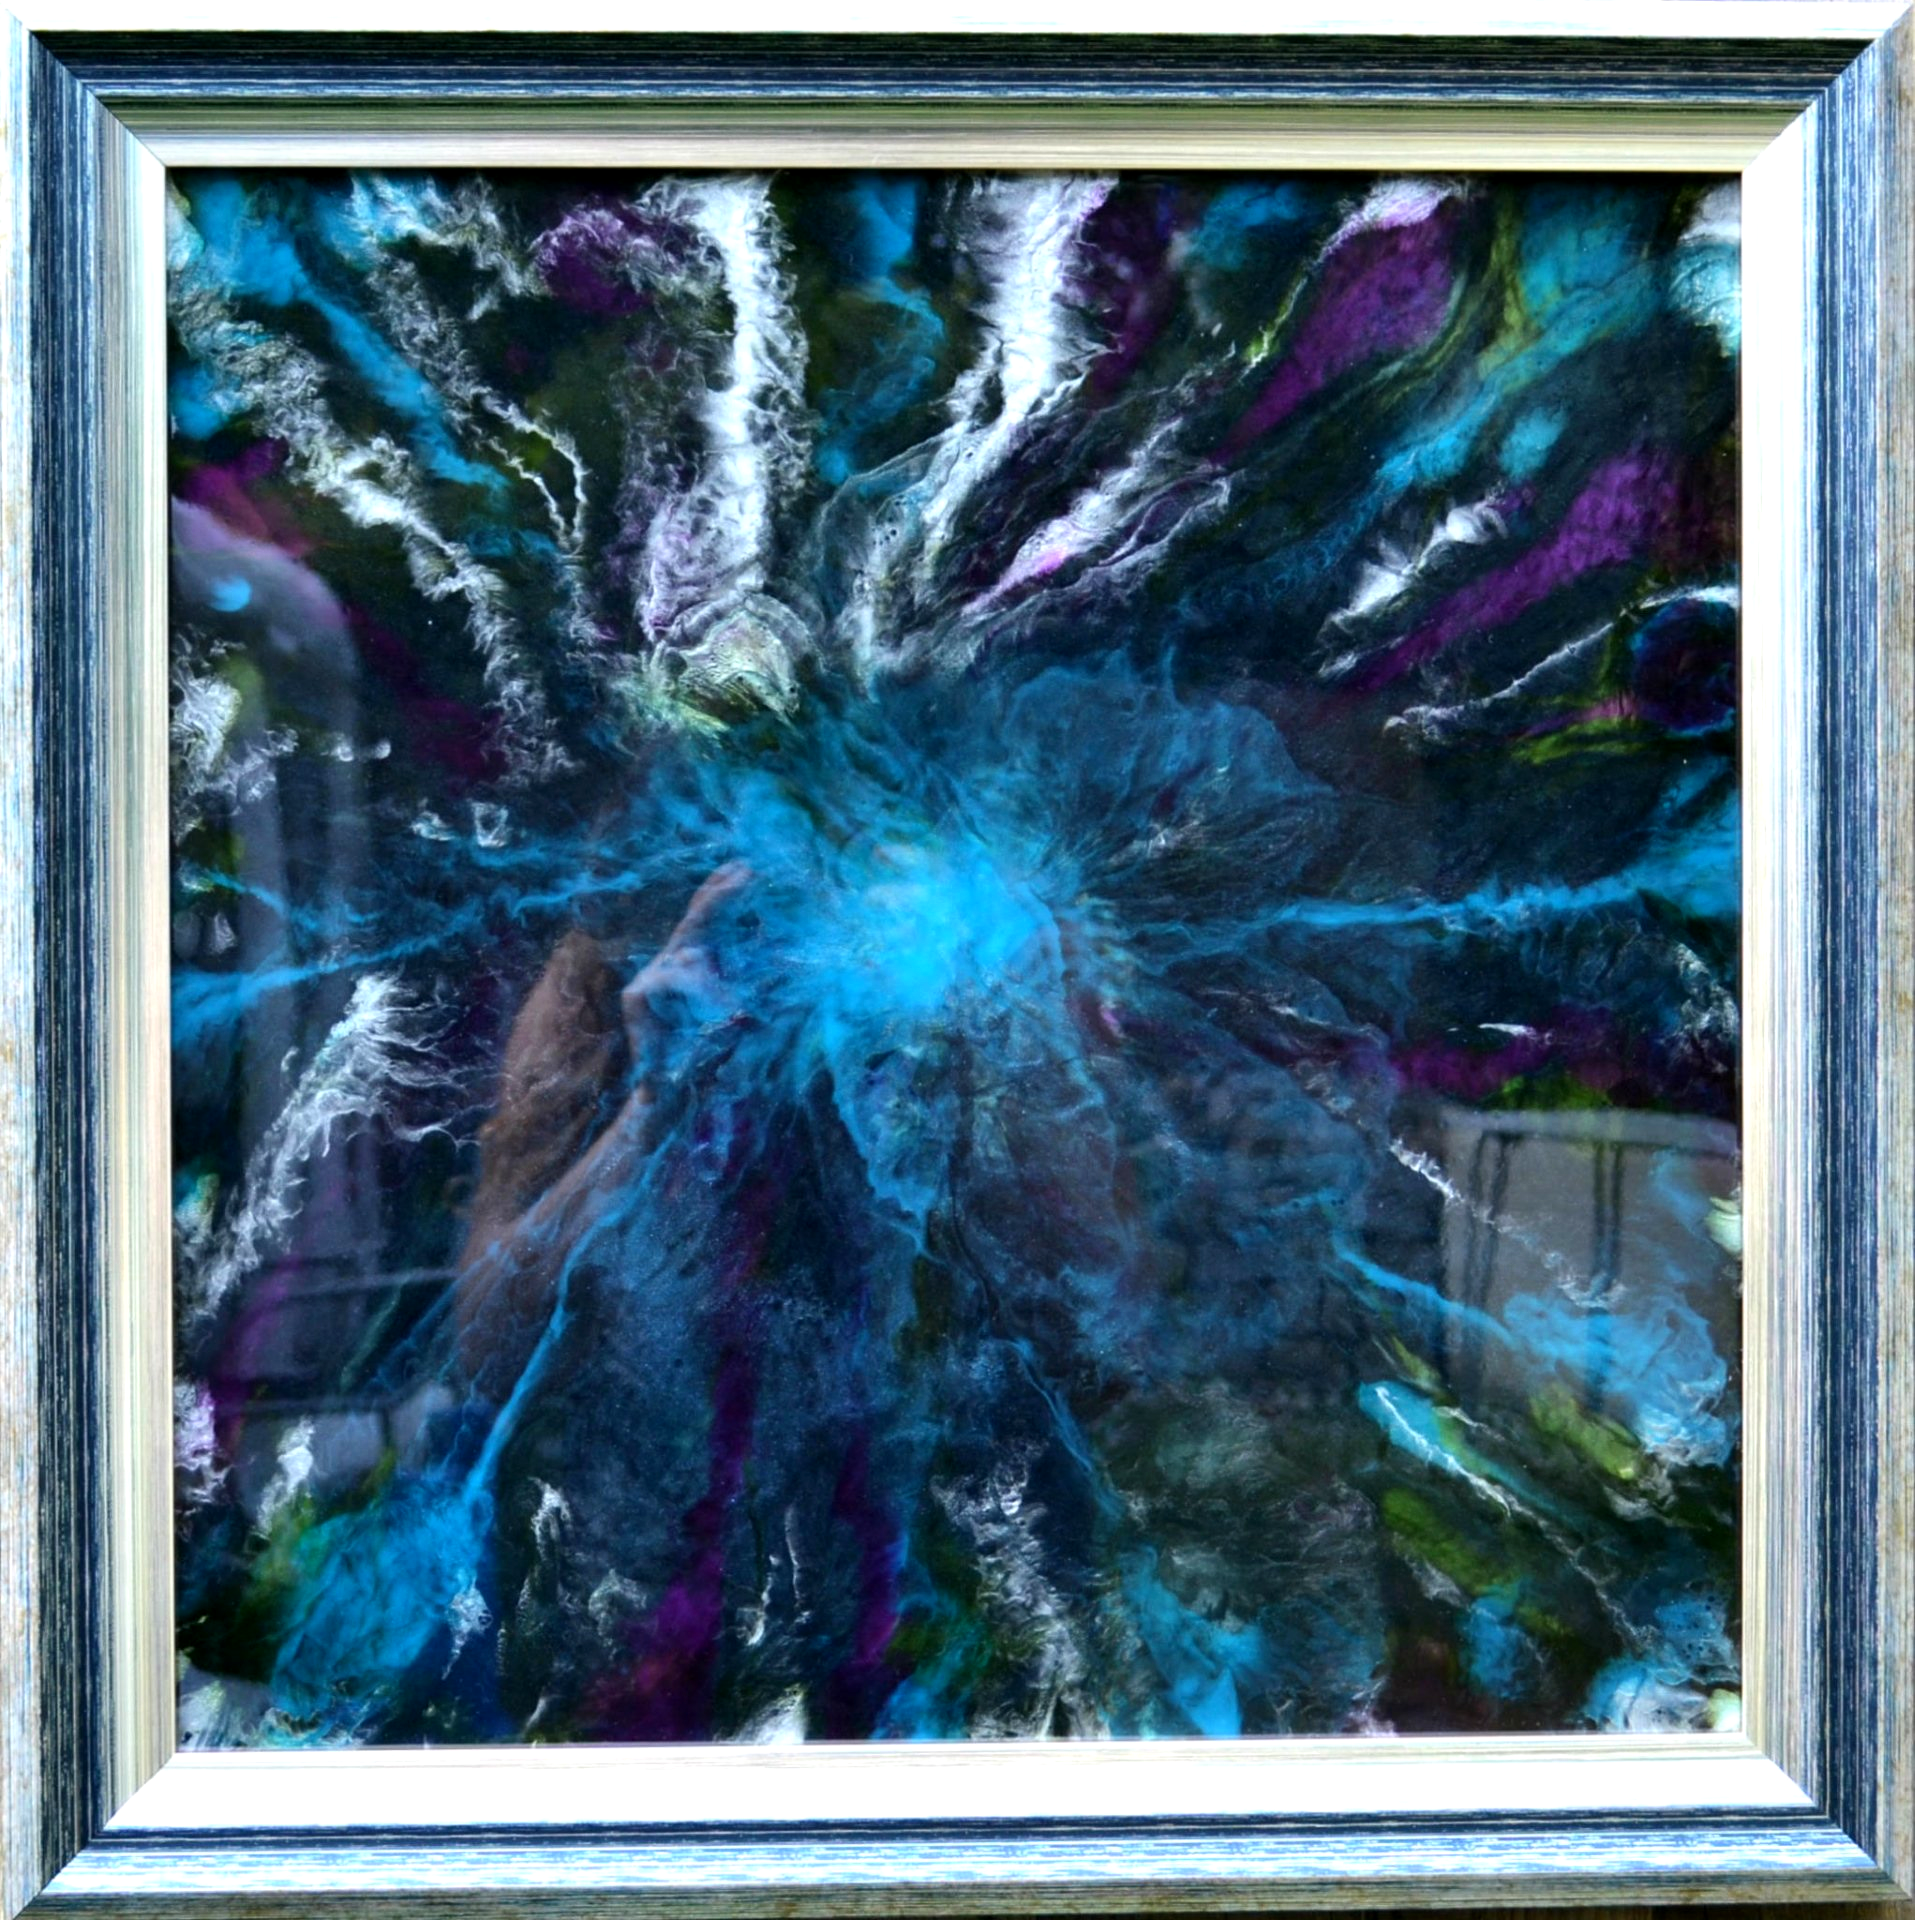 Mystic Sky, Original abstract painting with blue, purple and silver representing a mystic sky. Meditative piece.